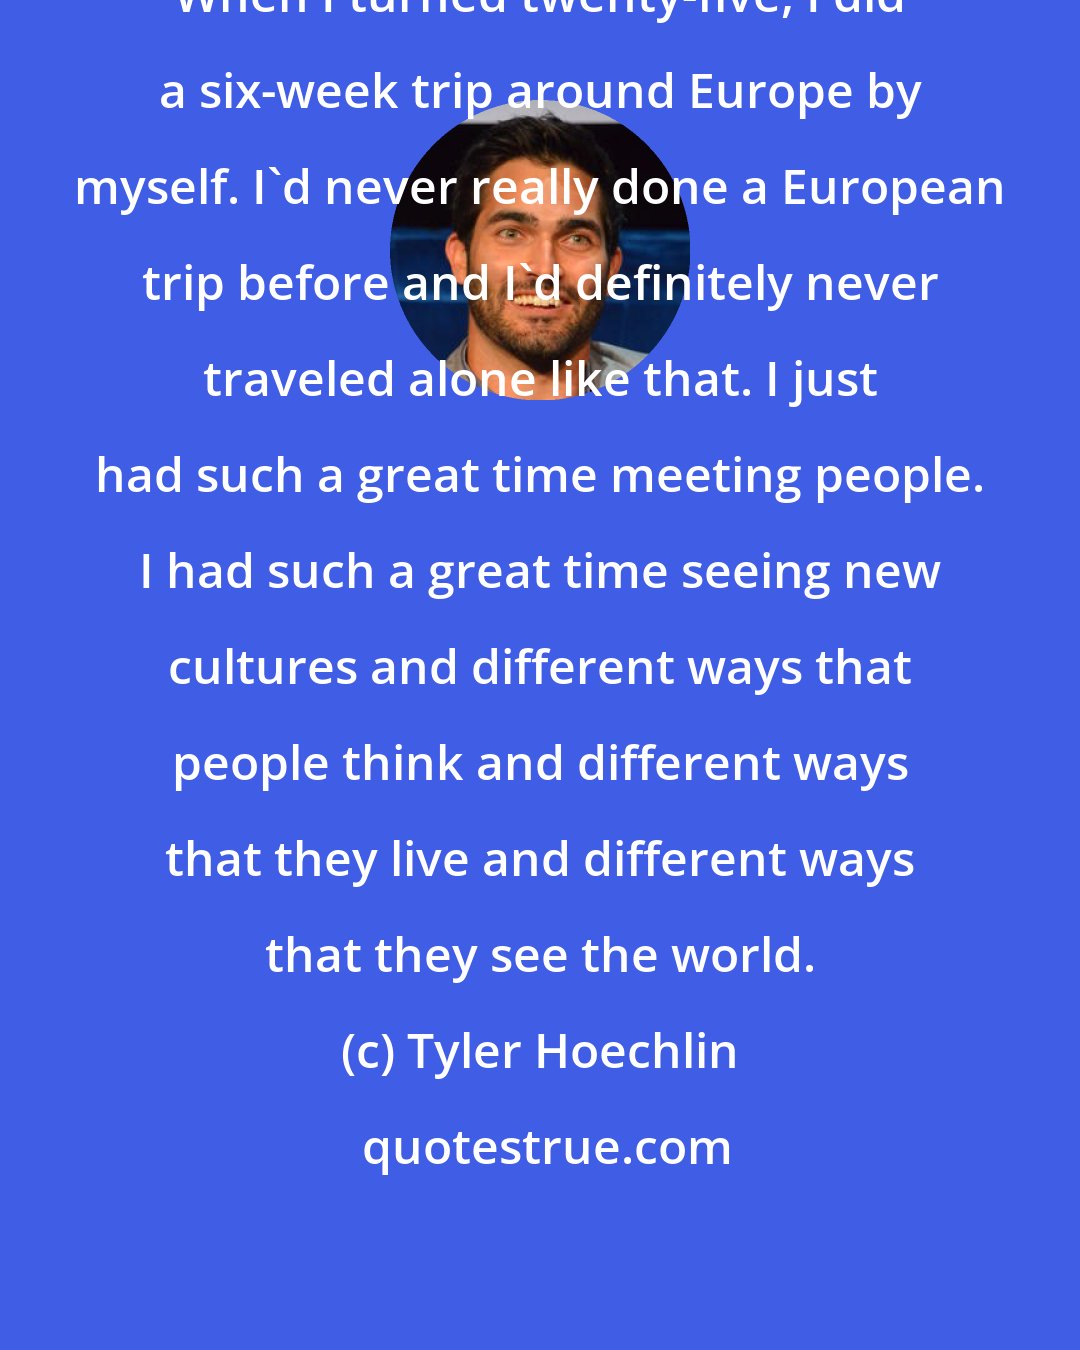 Tyler Hoechlin: When I turned twenty-five, I did a six-week trip around Europe by myself. I'd never really done a European trip before and I'd definitely never traveled alone like that. I just had such a great time meeting people. I had such a great time seeing new cultures and different ways that people think and different ways that they live and different ways that they see the world.